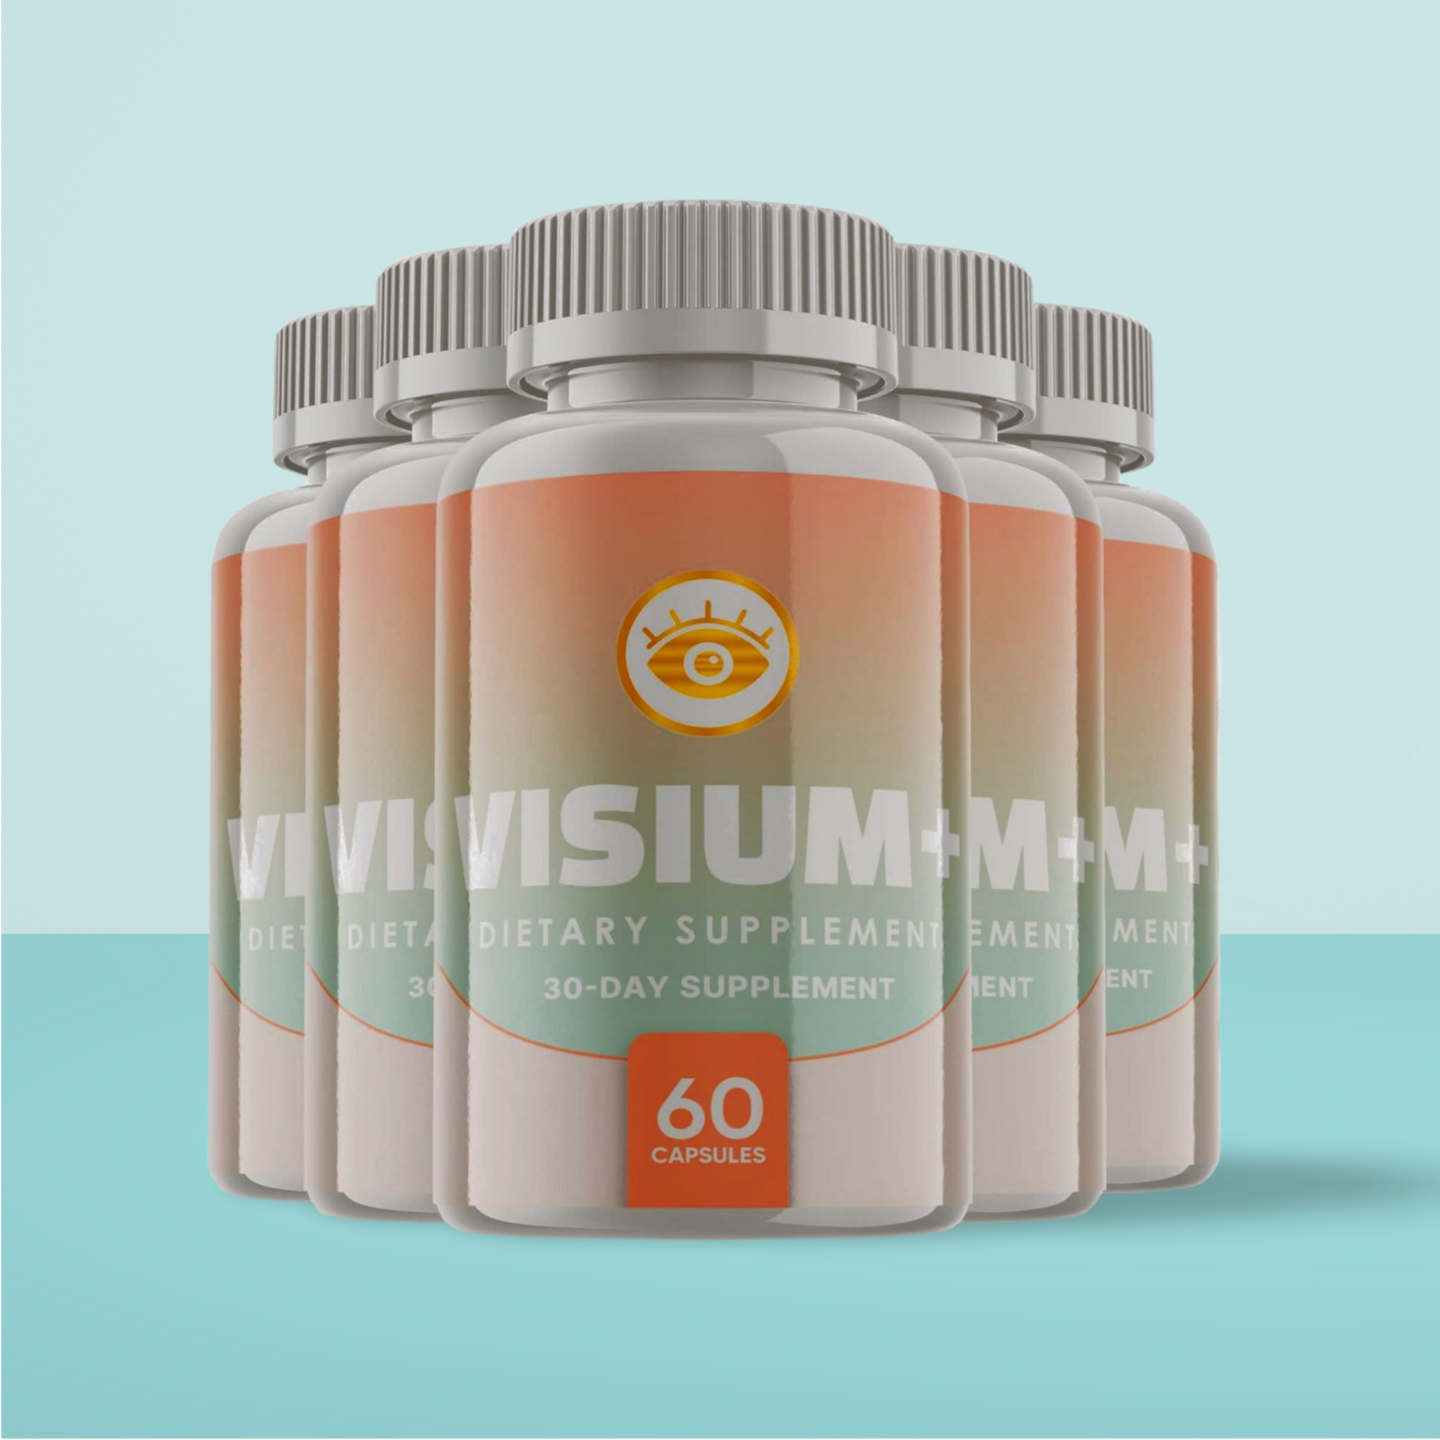 Visium Plus Reviews – Does It Live Up to Its Claims? Discover the Truth in Our Analysis